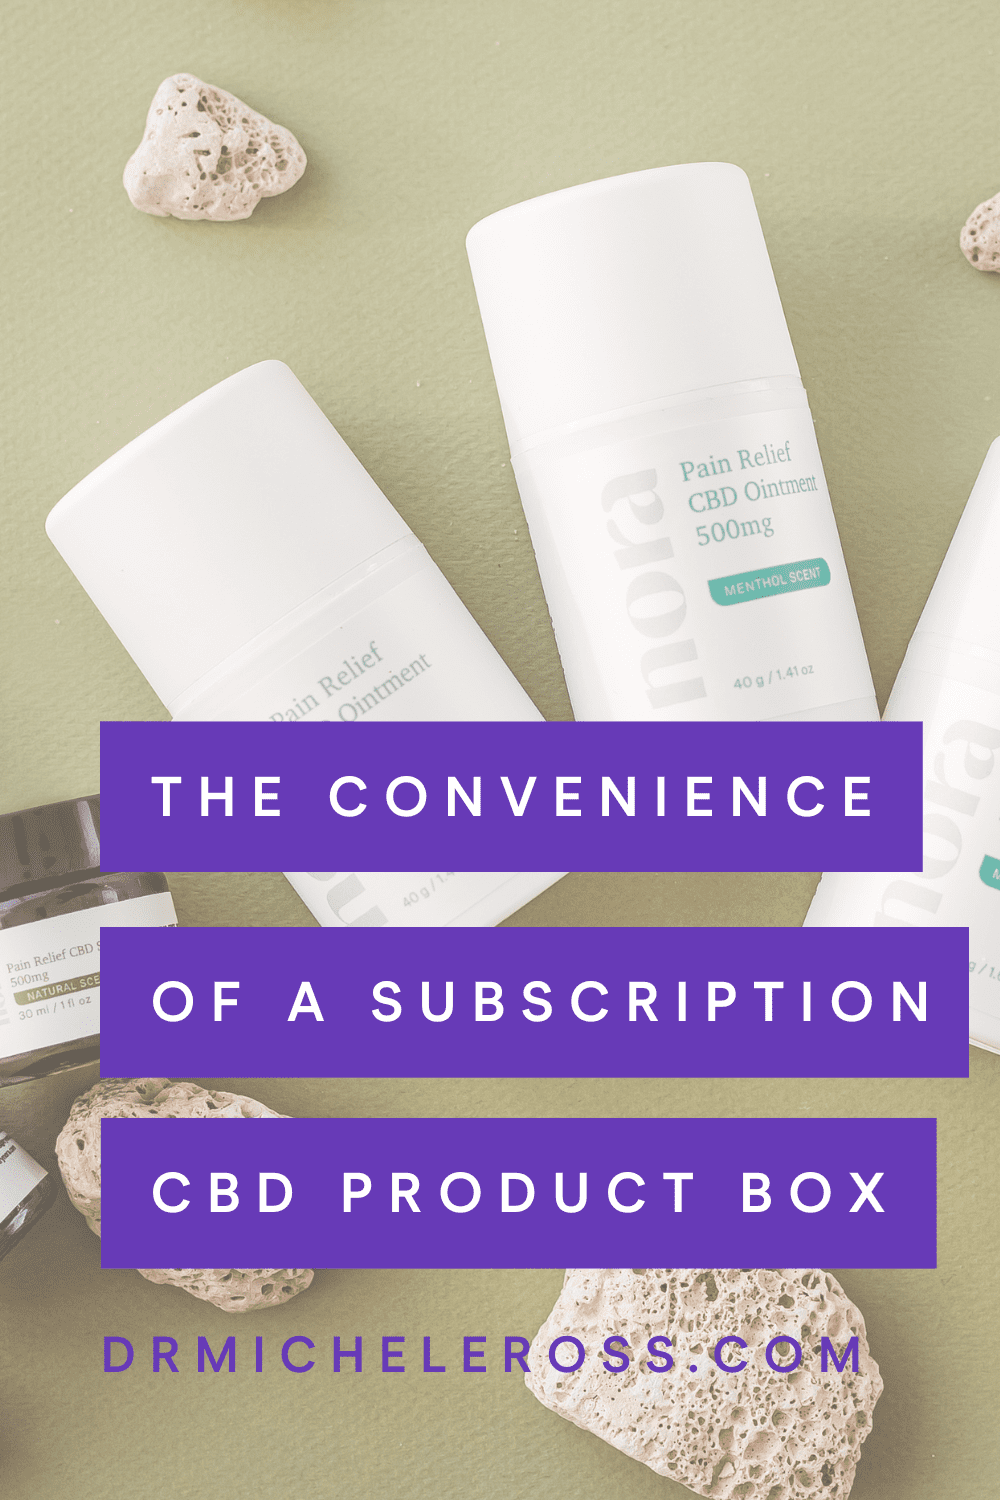 Enjoying The Convenience of a Subscription Weed Box